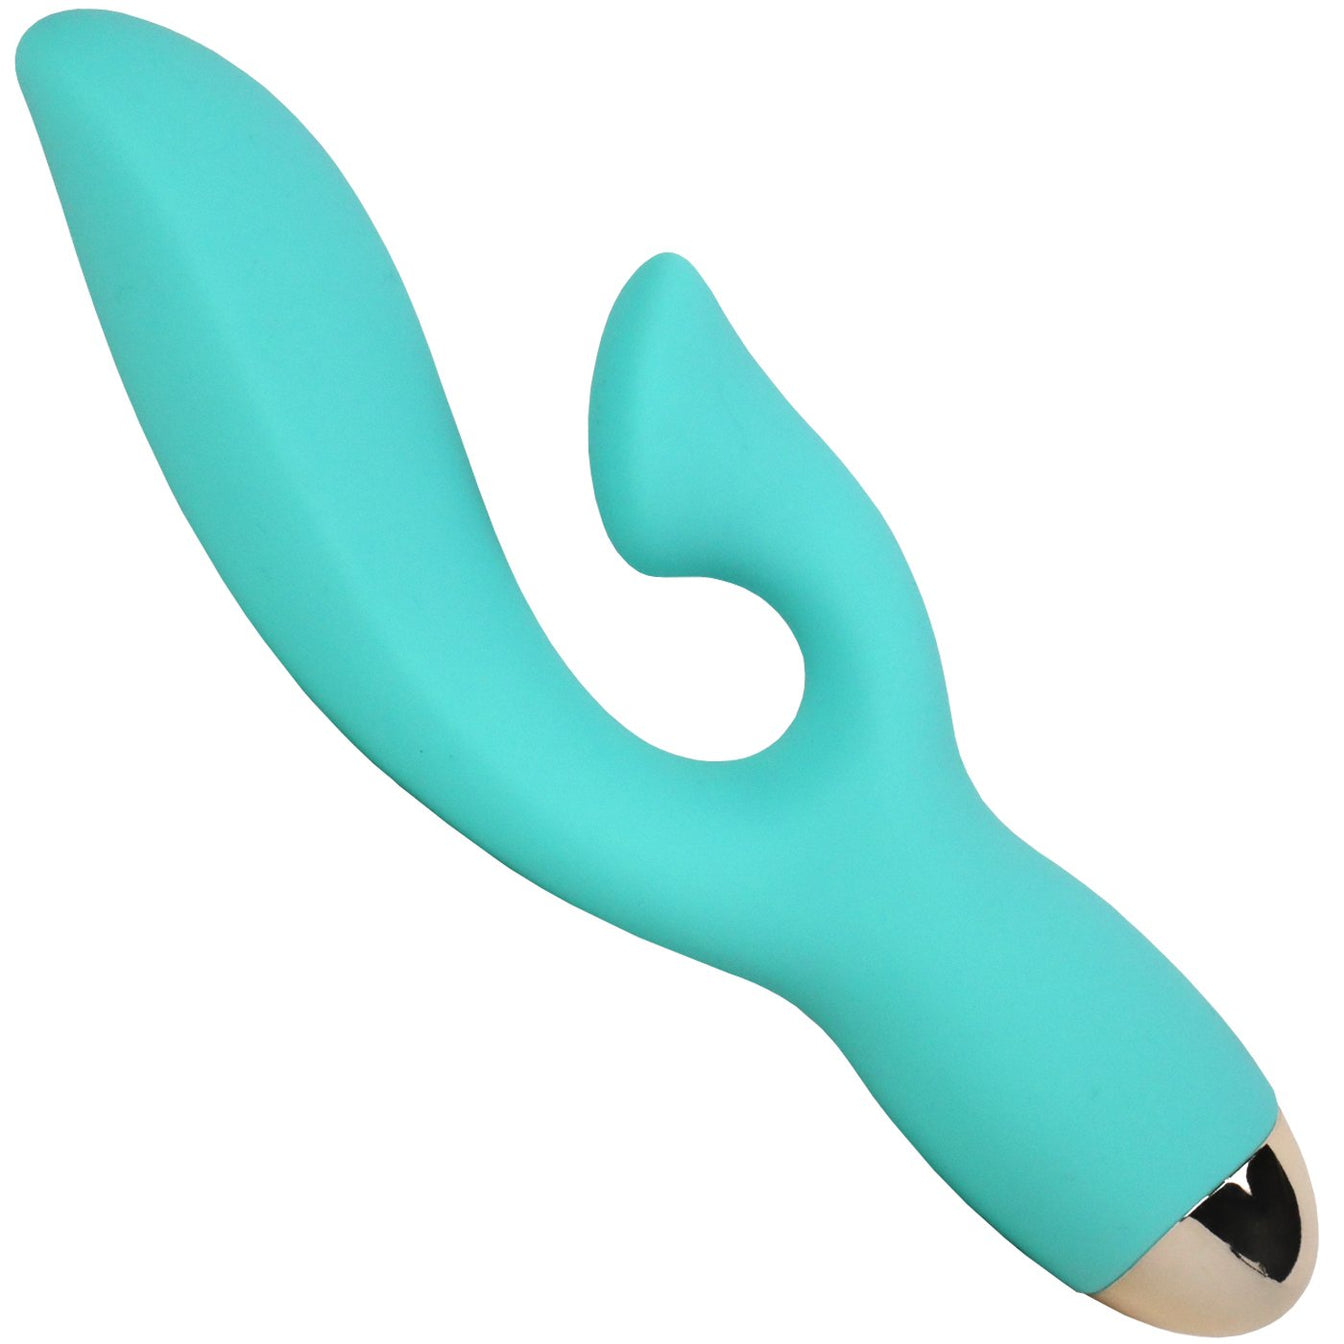 Teal dual vibrator made of silicone for gspot and clit stimulation